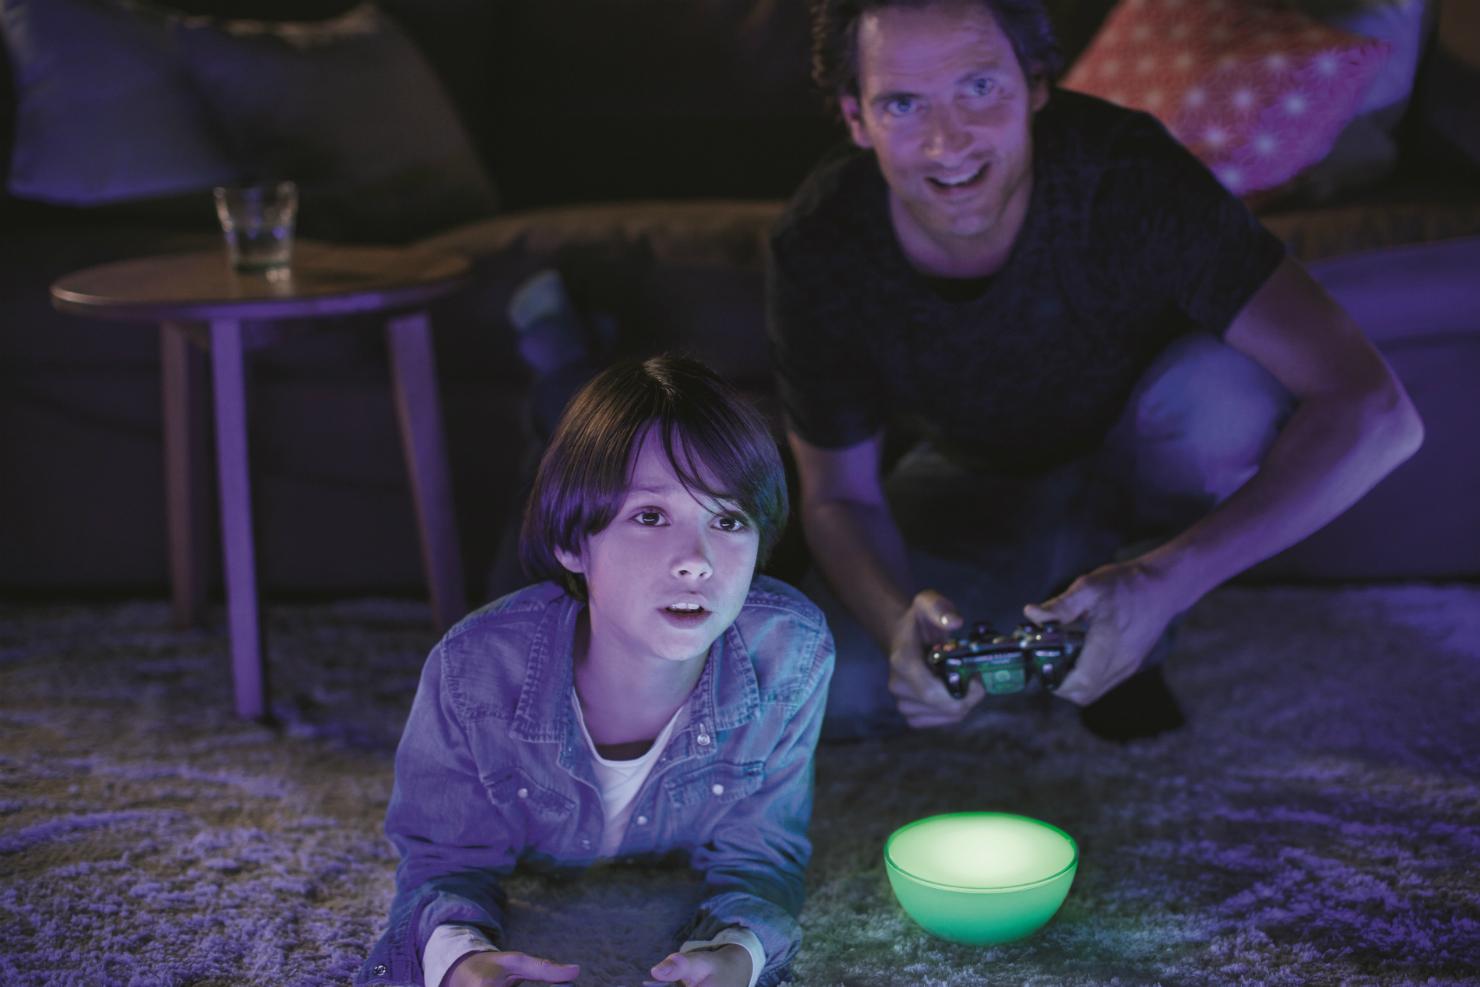 philips hue go is a nifty looking portable led light game